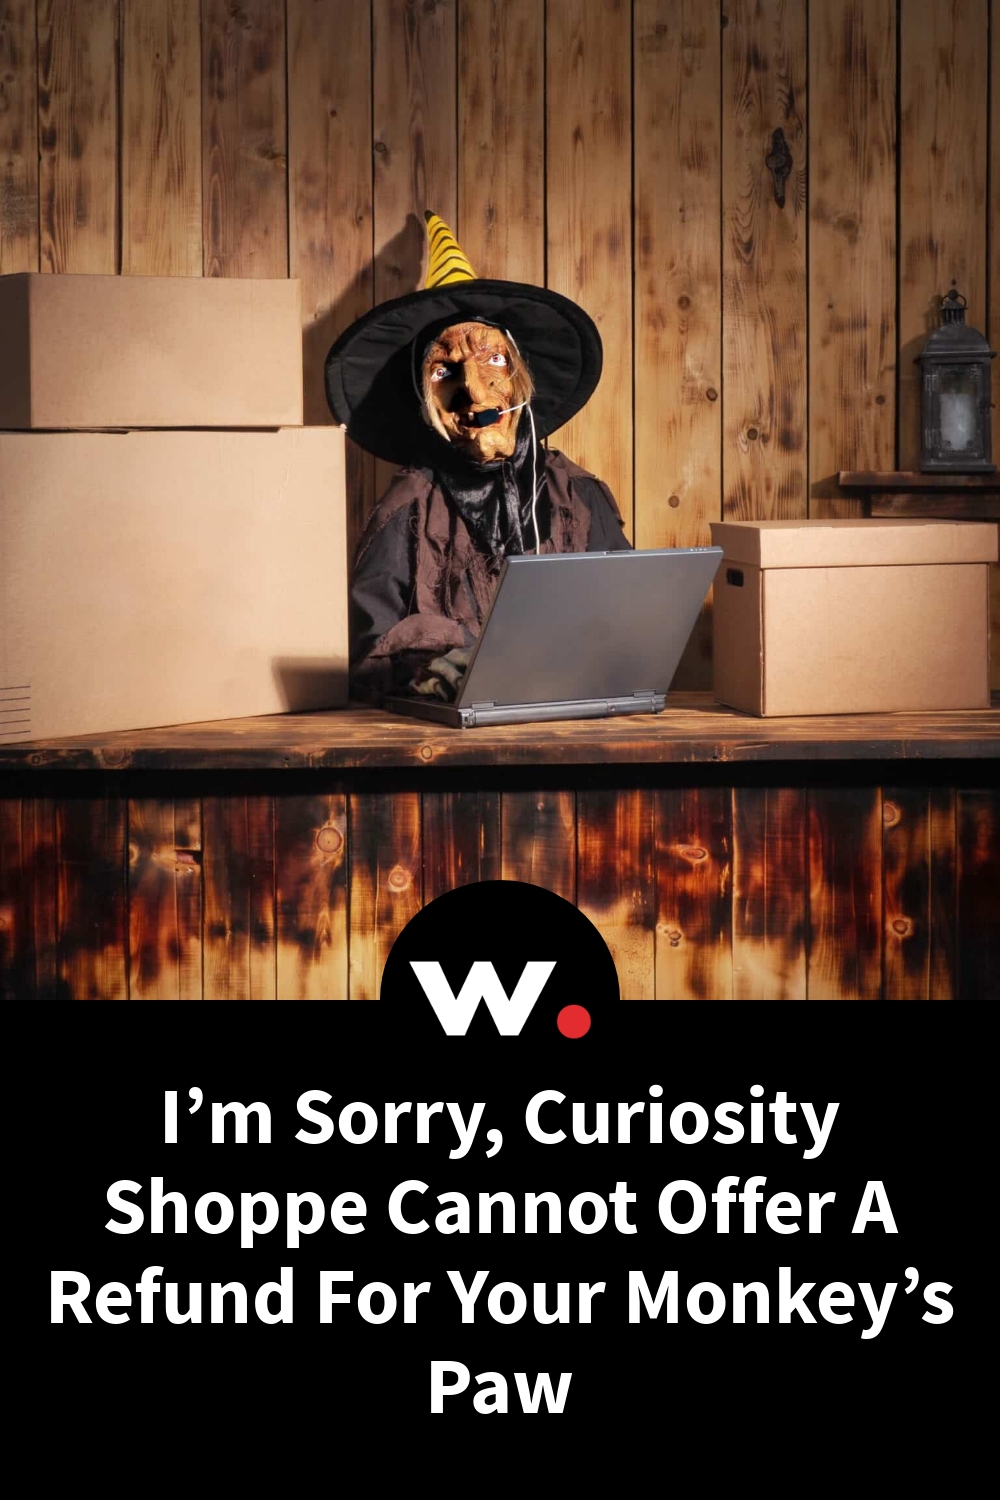 I’m Sorry, Curiosity Shoppe Cannot Offer A Refund For Your Monkey’s Paw